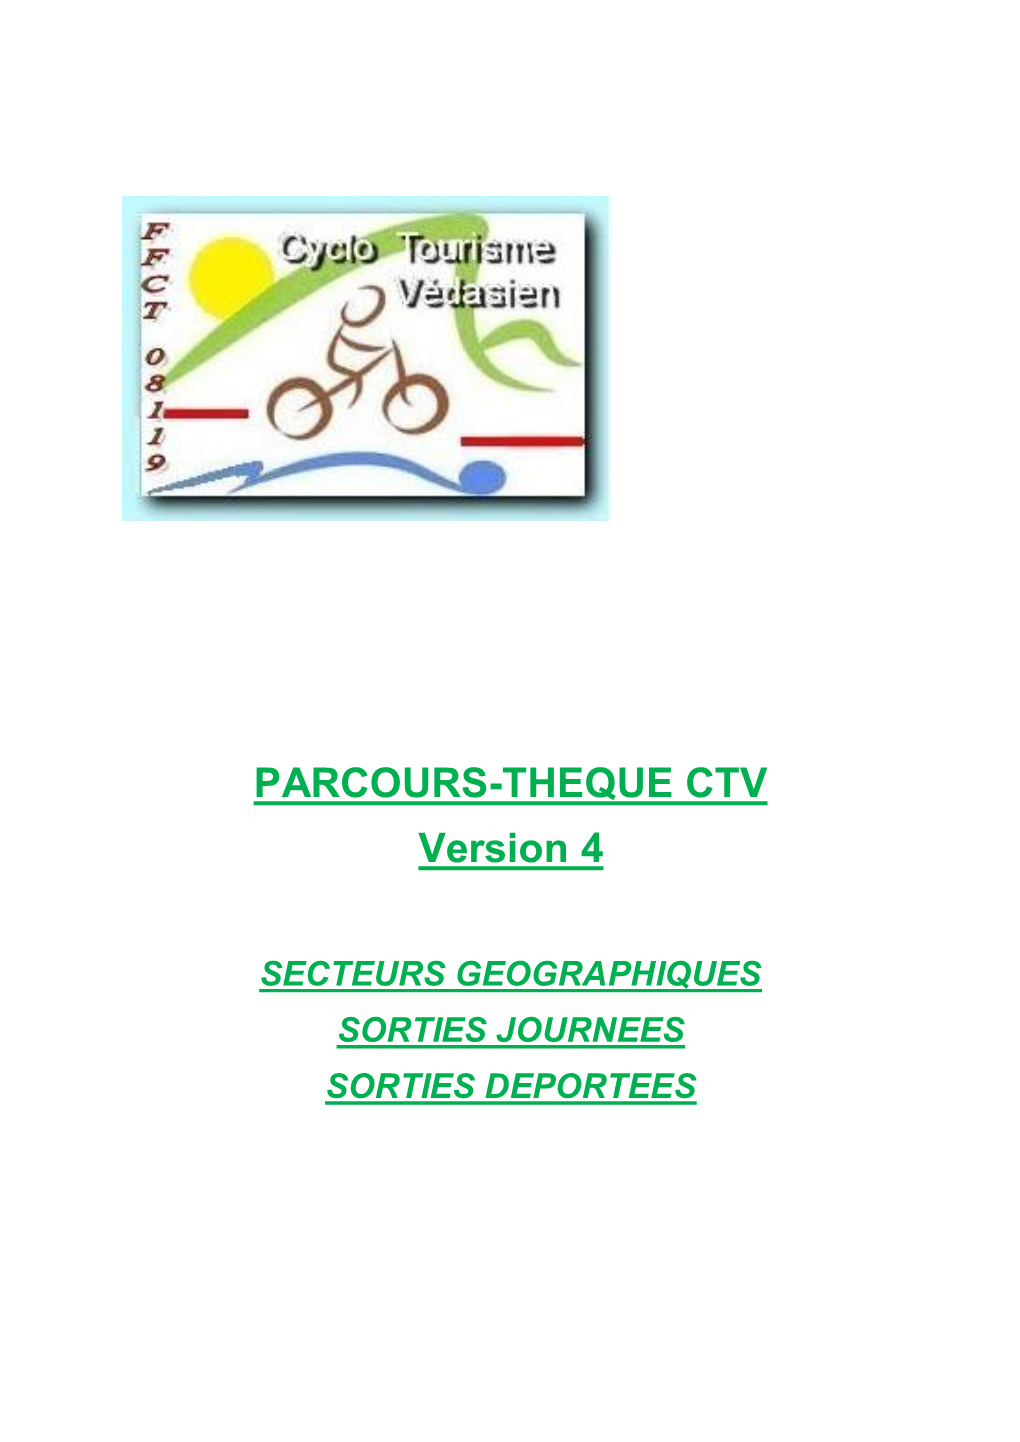 PARCOURS-THEQUE CTV Version 4